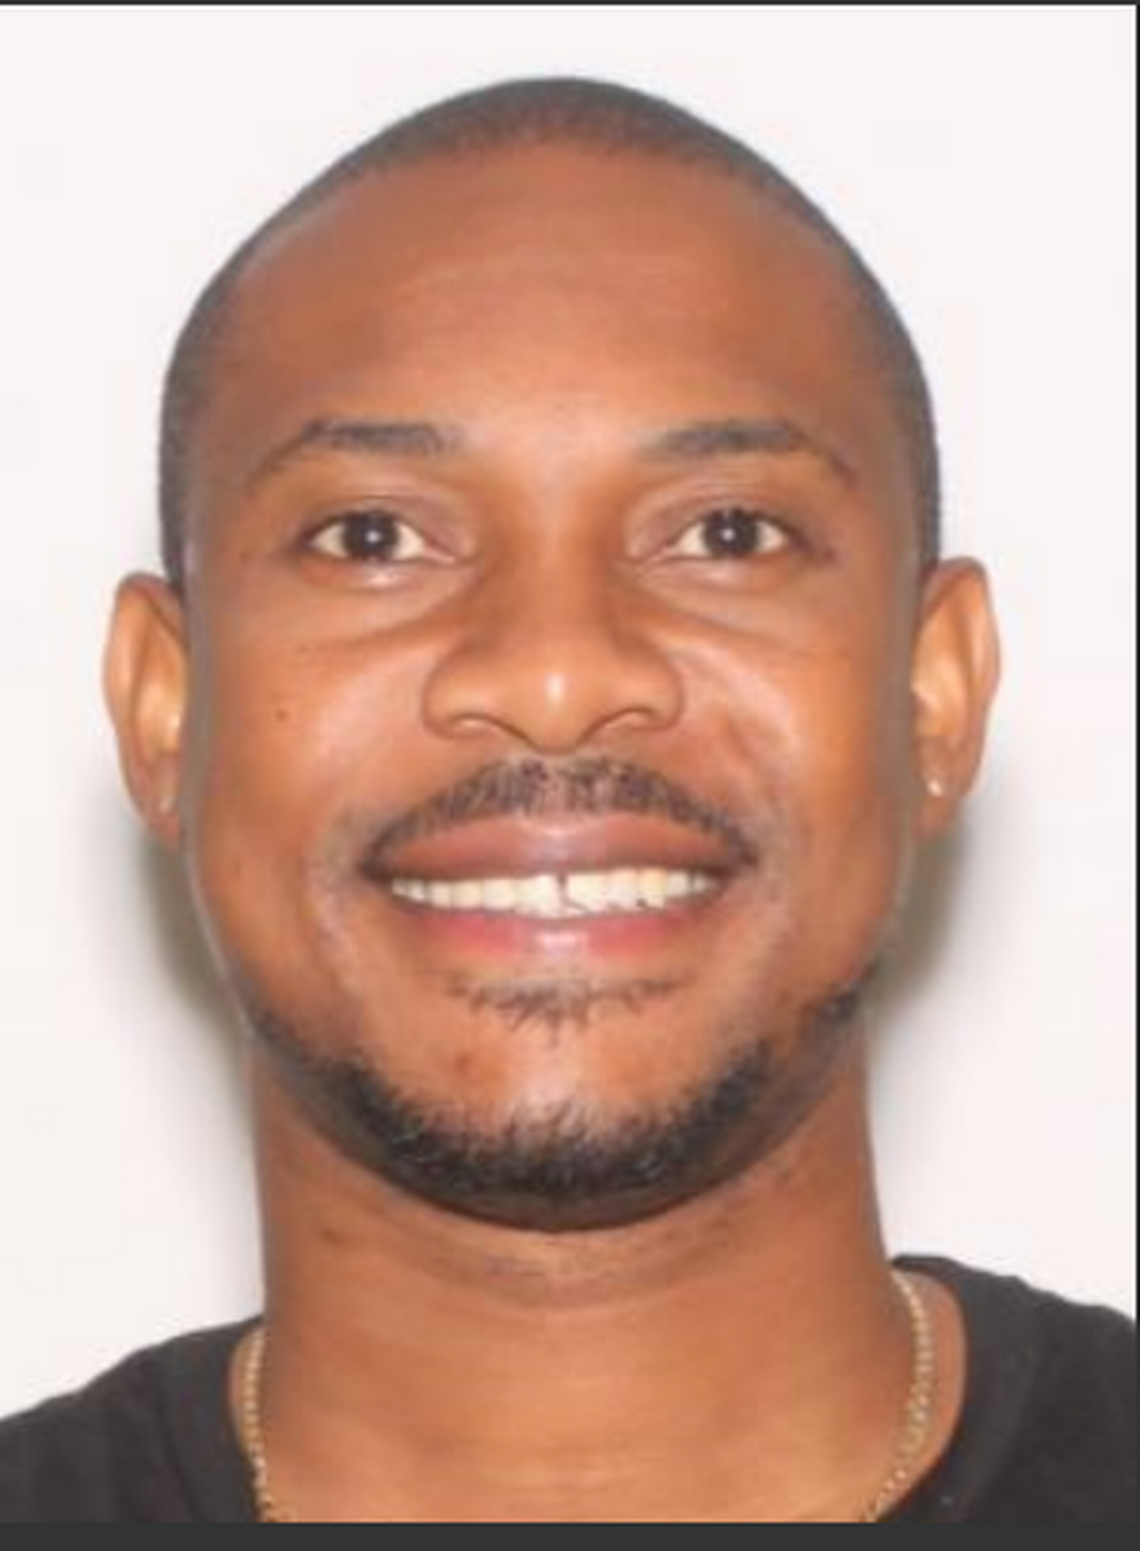 Maiky Simeon, 30, has been identified as the man driving a silver Infinity in the wrong direction on the Palmetto at 4:30 a.m. Saturday, Aug. 20, 2022. His car struck a Honda carrying four women and a man, killing them all, according to Florida Highway Patrol.